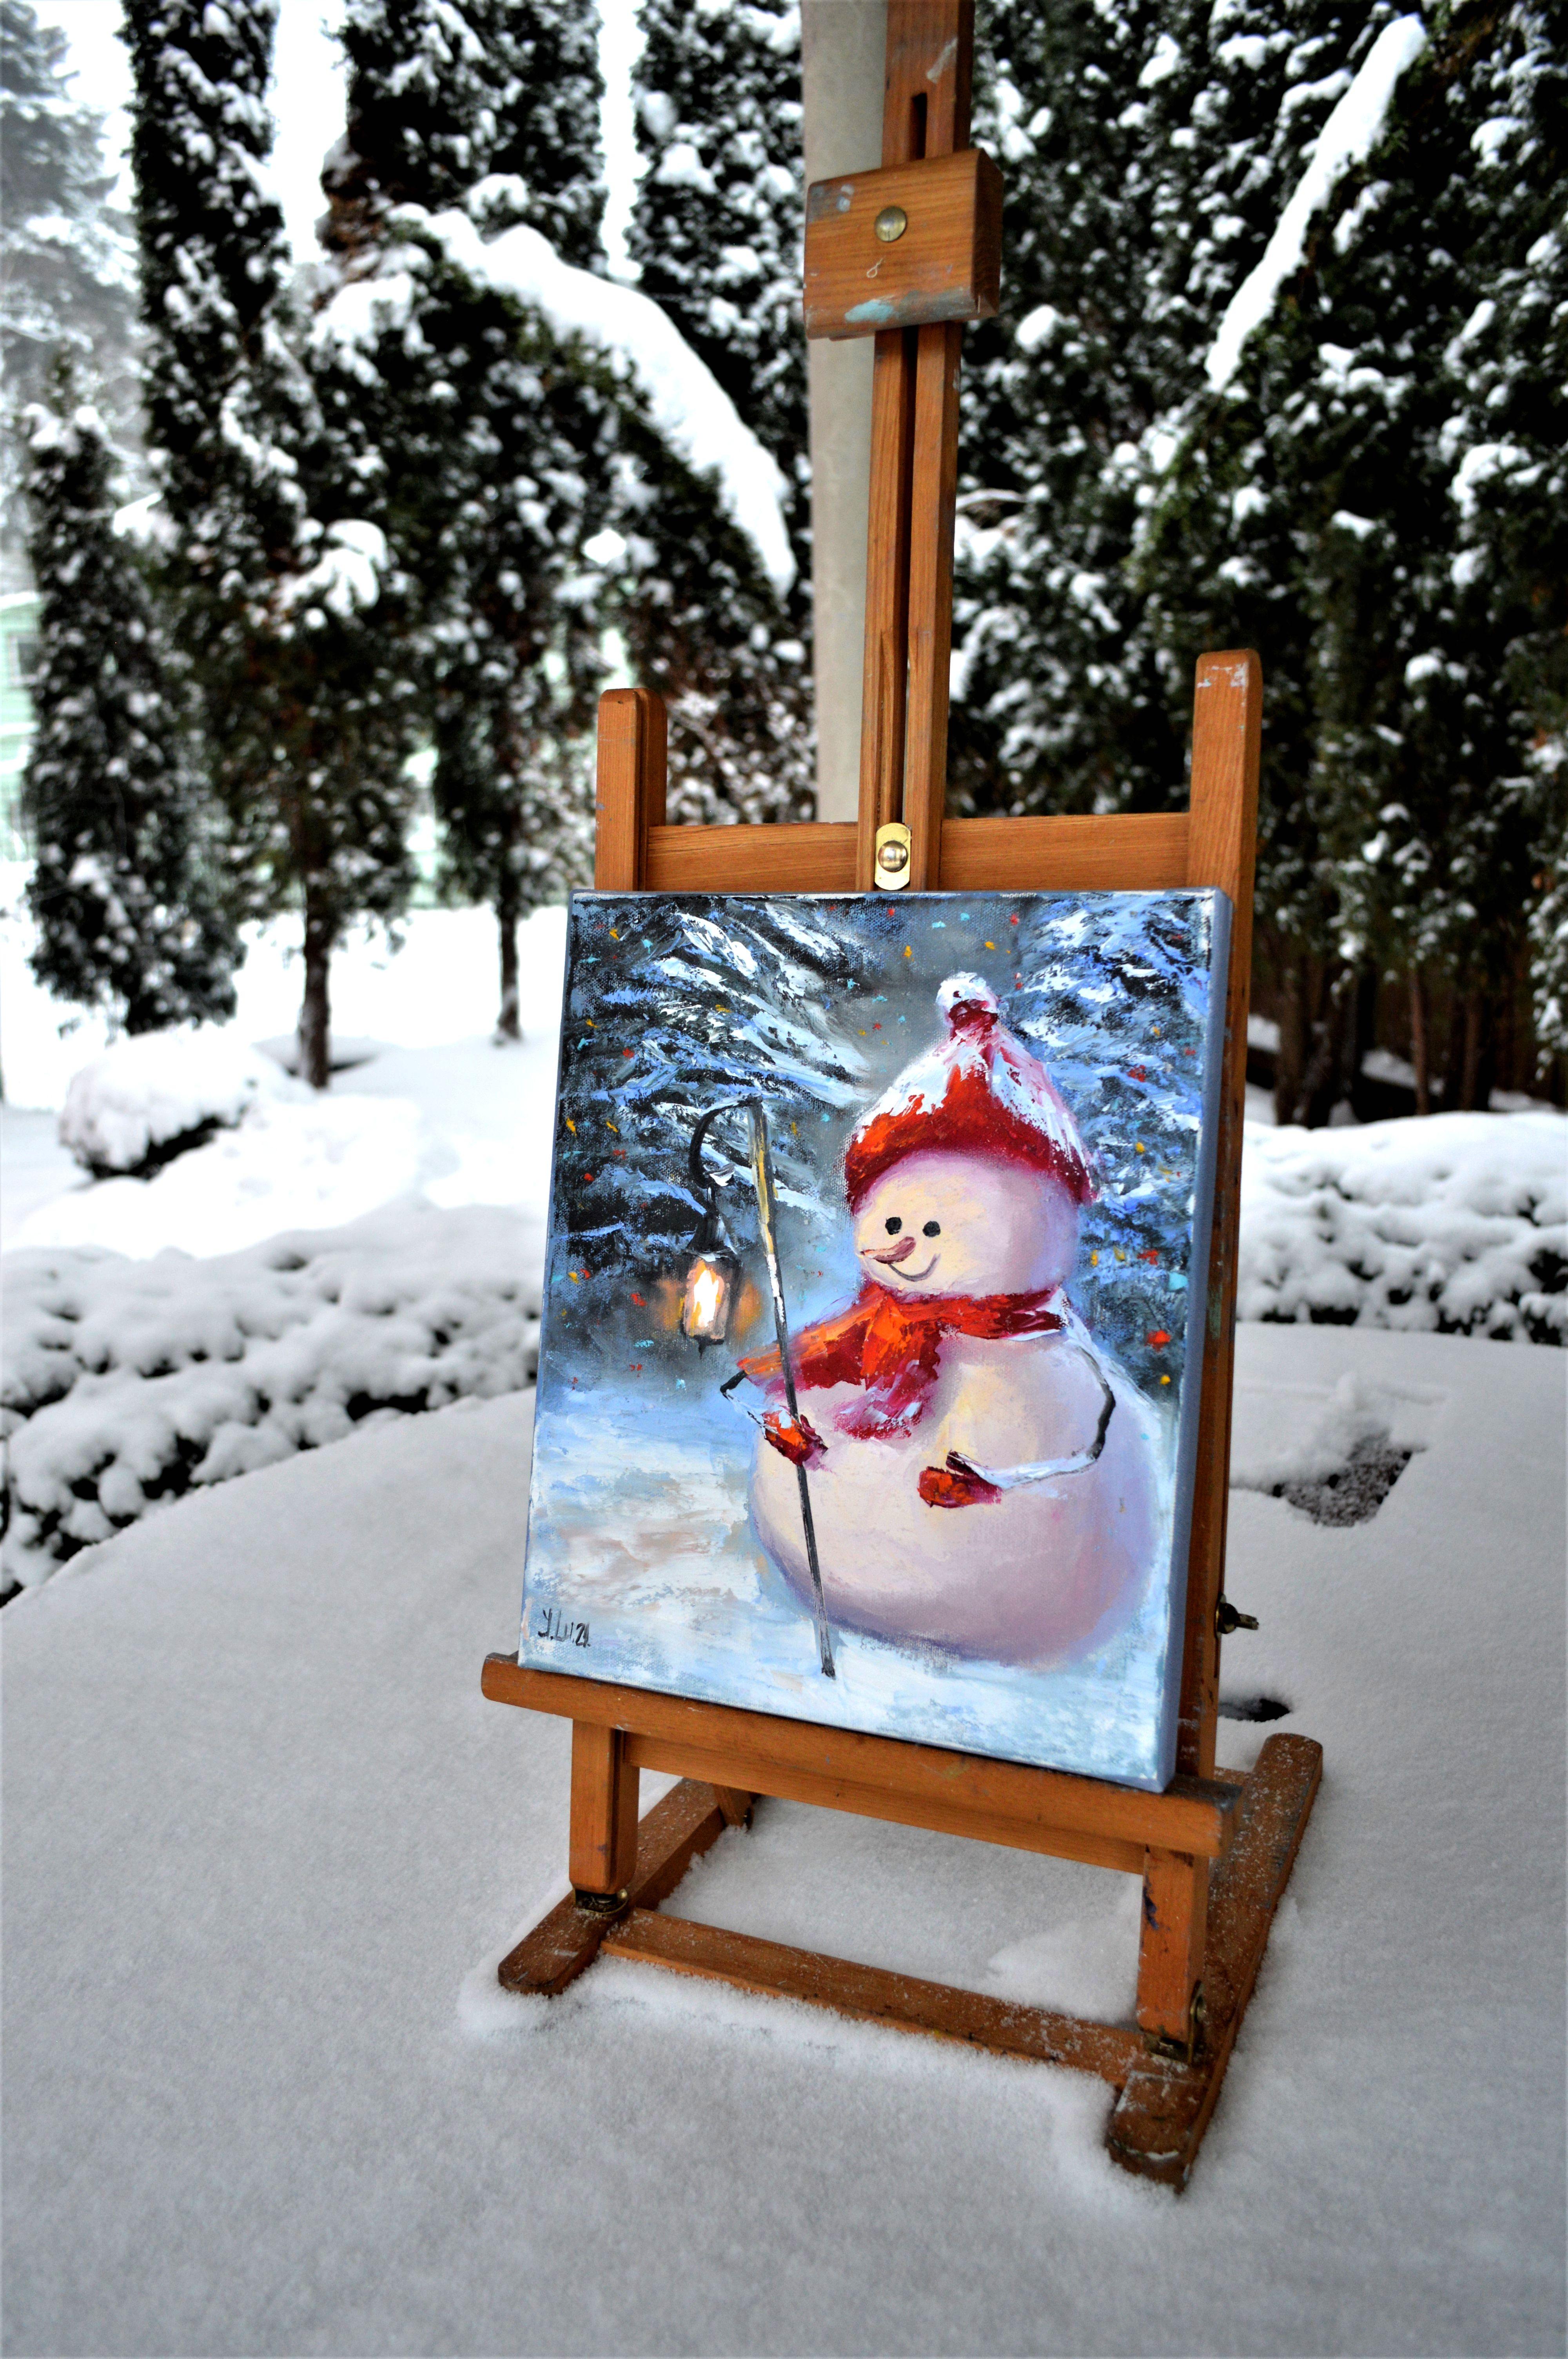 In my painting, I've poured my soul into capturing the whimsical joy and innocent warmth of winter's magic. Brushstrokes of oil dance across the canvas, framing a cheerful snowman as the embodiment of winter bliss. Clutching a lantern, he seems to